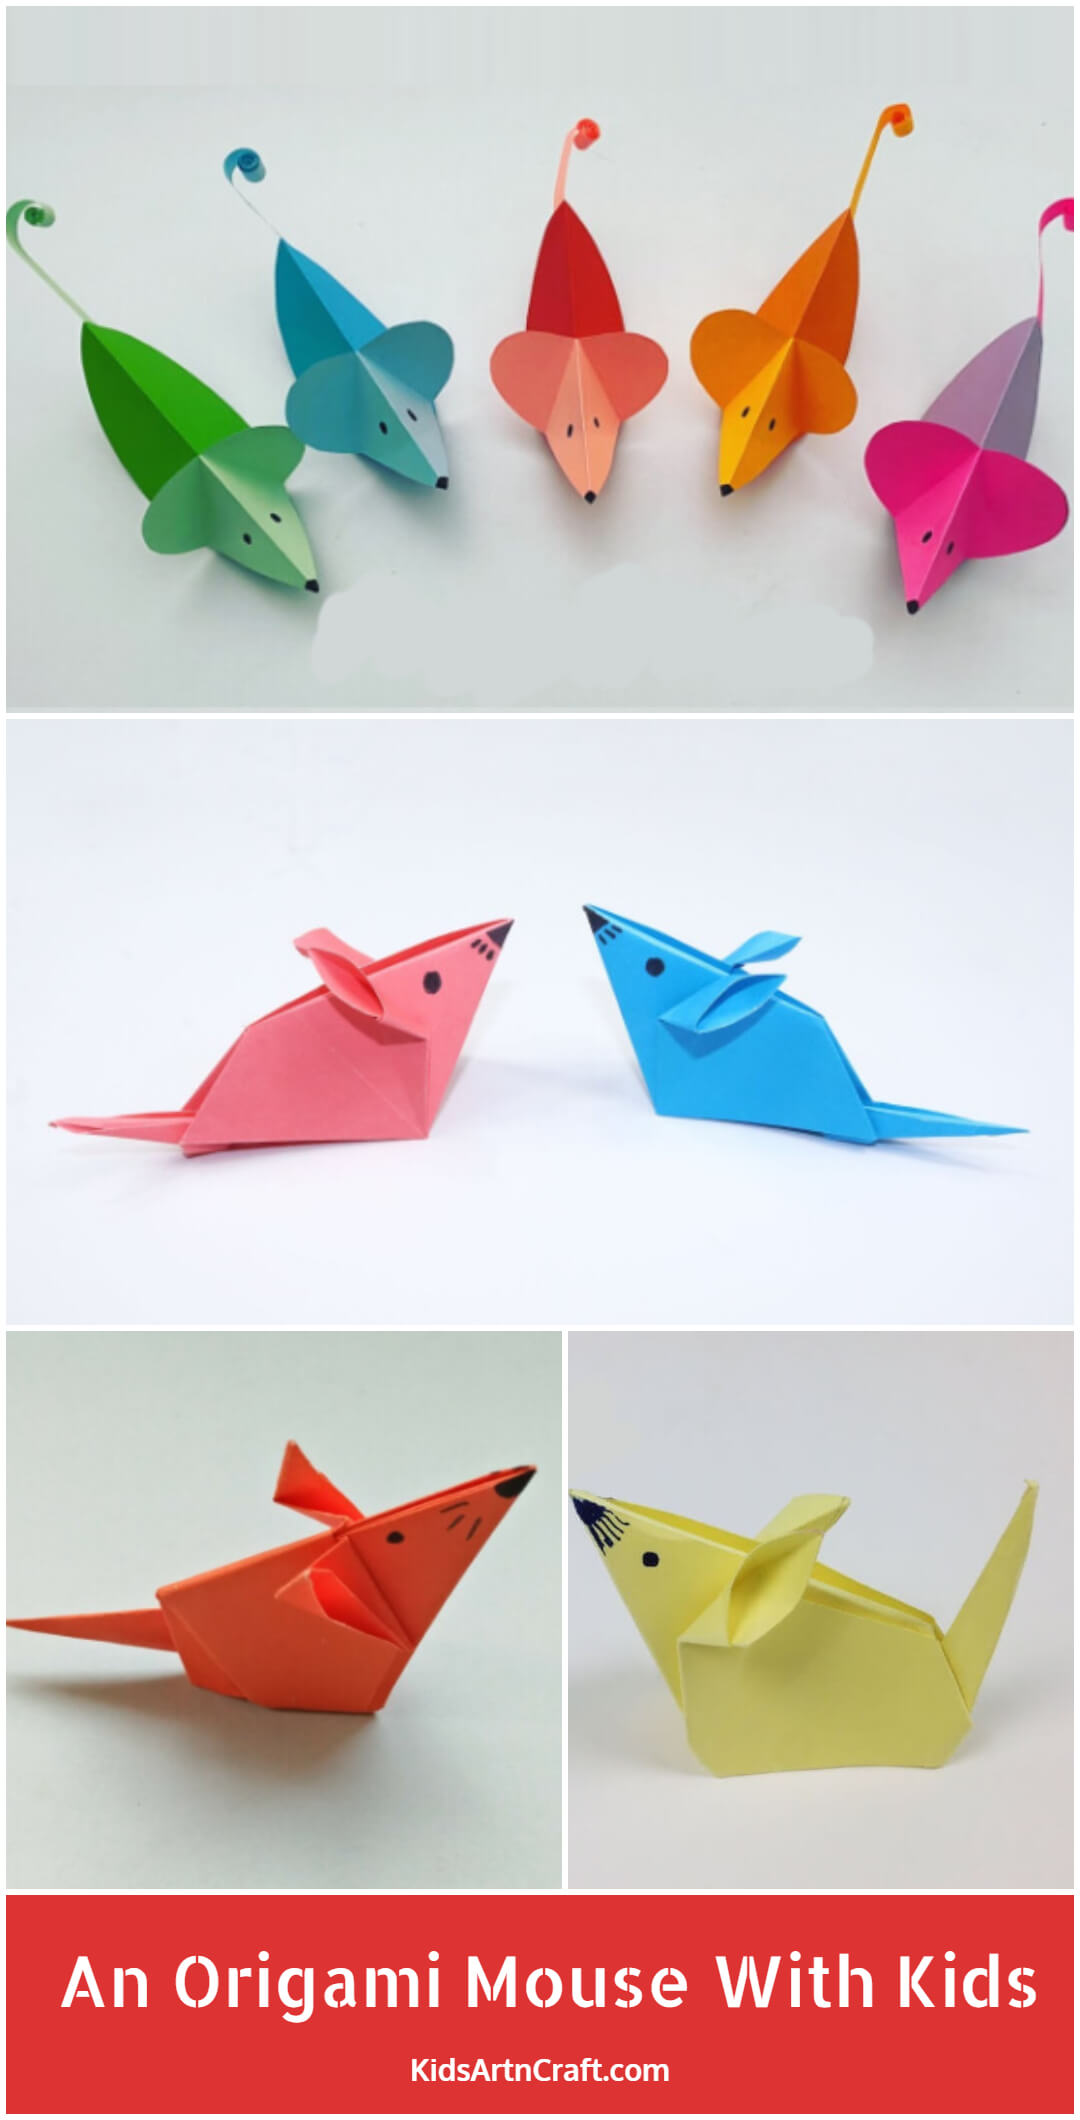 How To Make An Origami Mouse With Kids